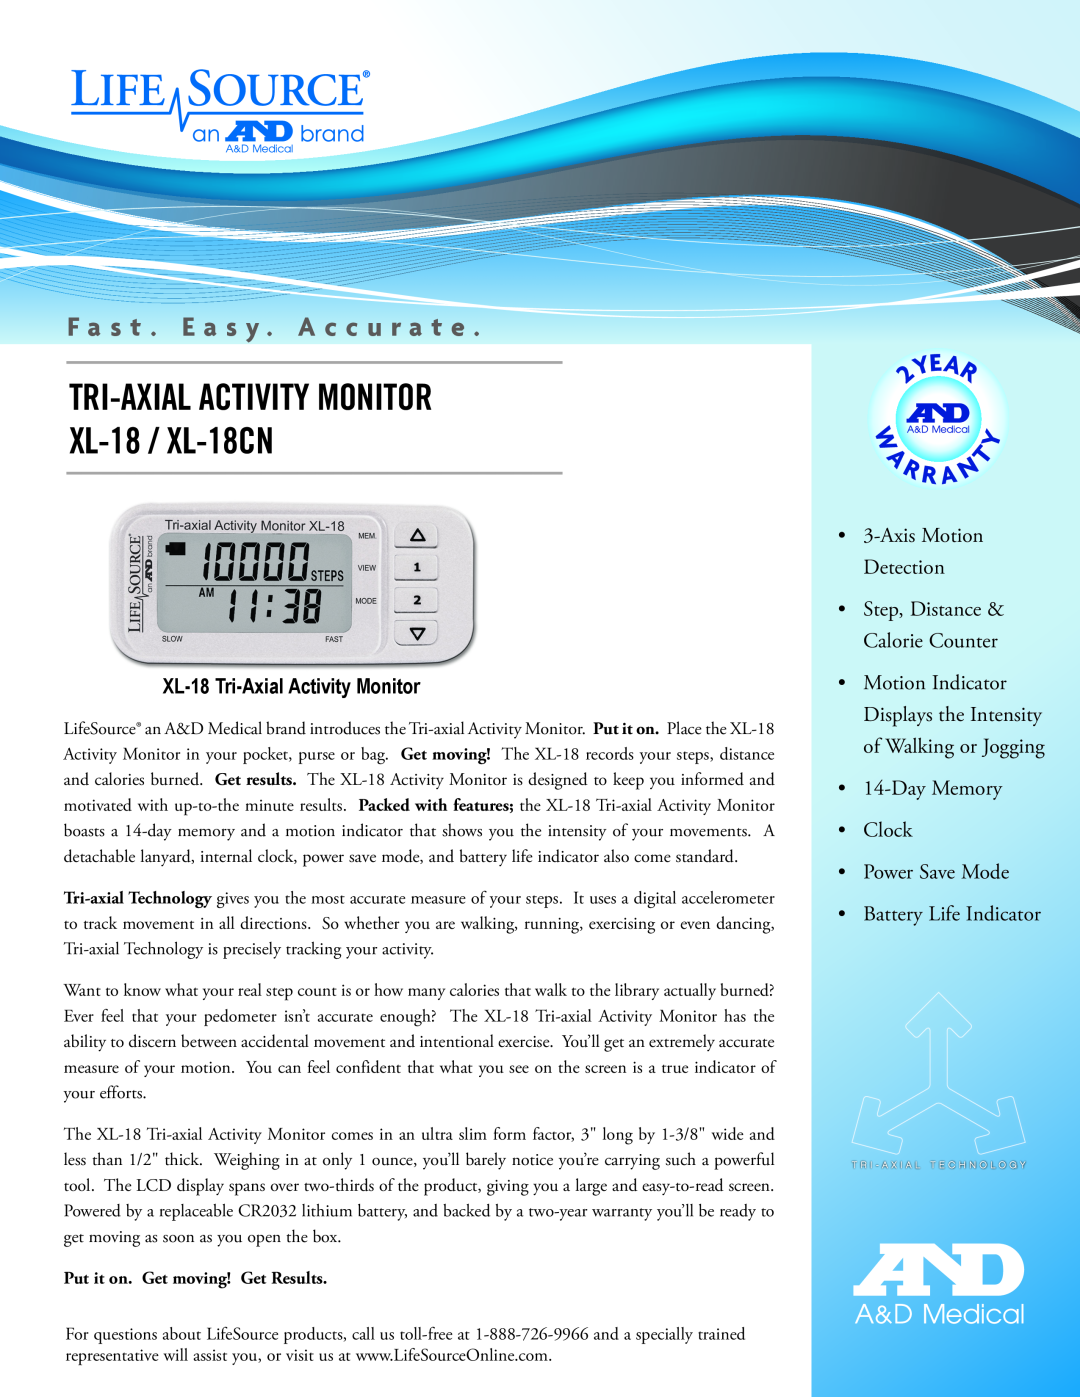 LifeSource manual Put it on. Get moving! Get Results, TRI-AXIAL ACTIVITY MONITOR XL-18 / XL-18CN 